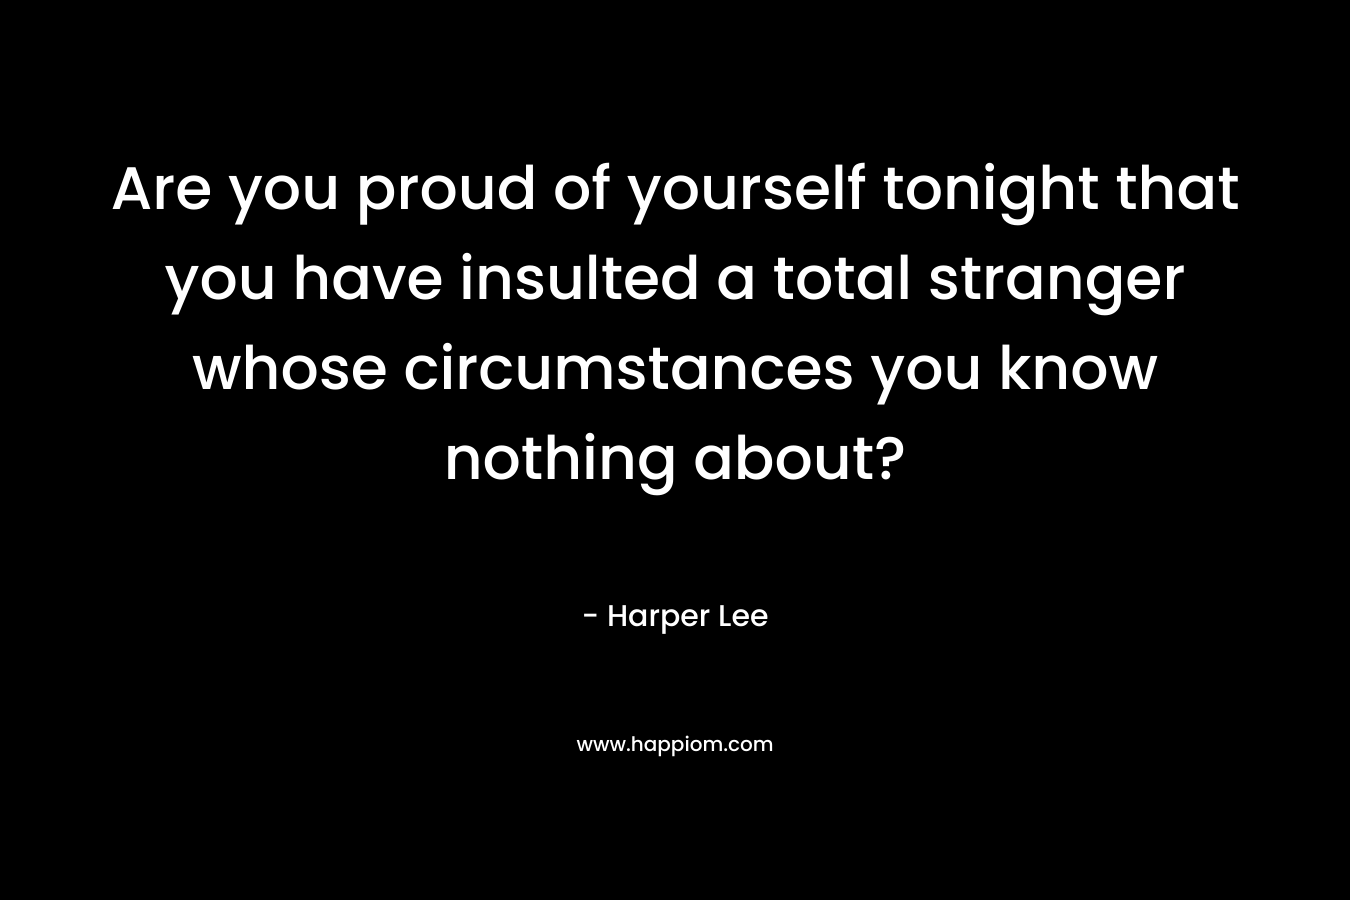 Are you proud of yourself tonight that you have insulted a total stranger whose circumstances you know nothing about? – Harper Lee